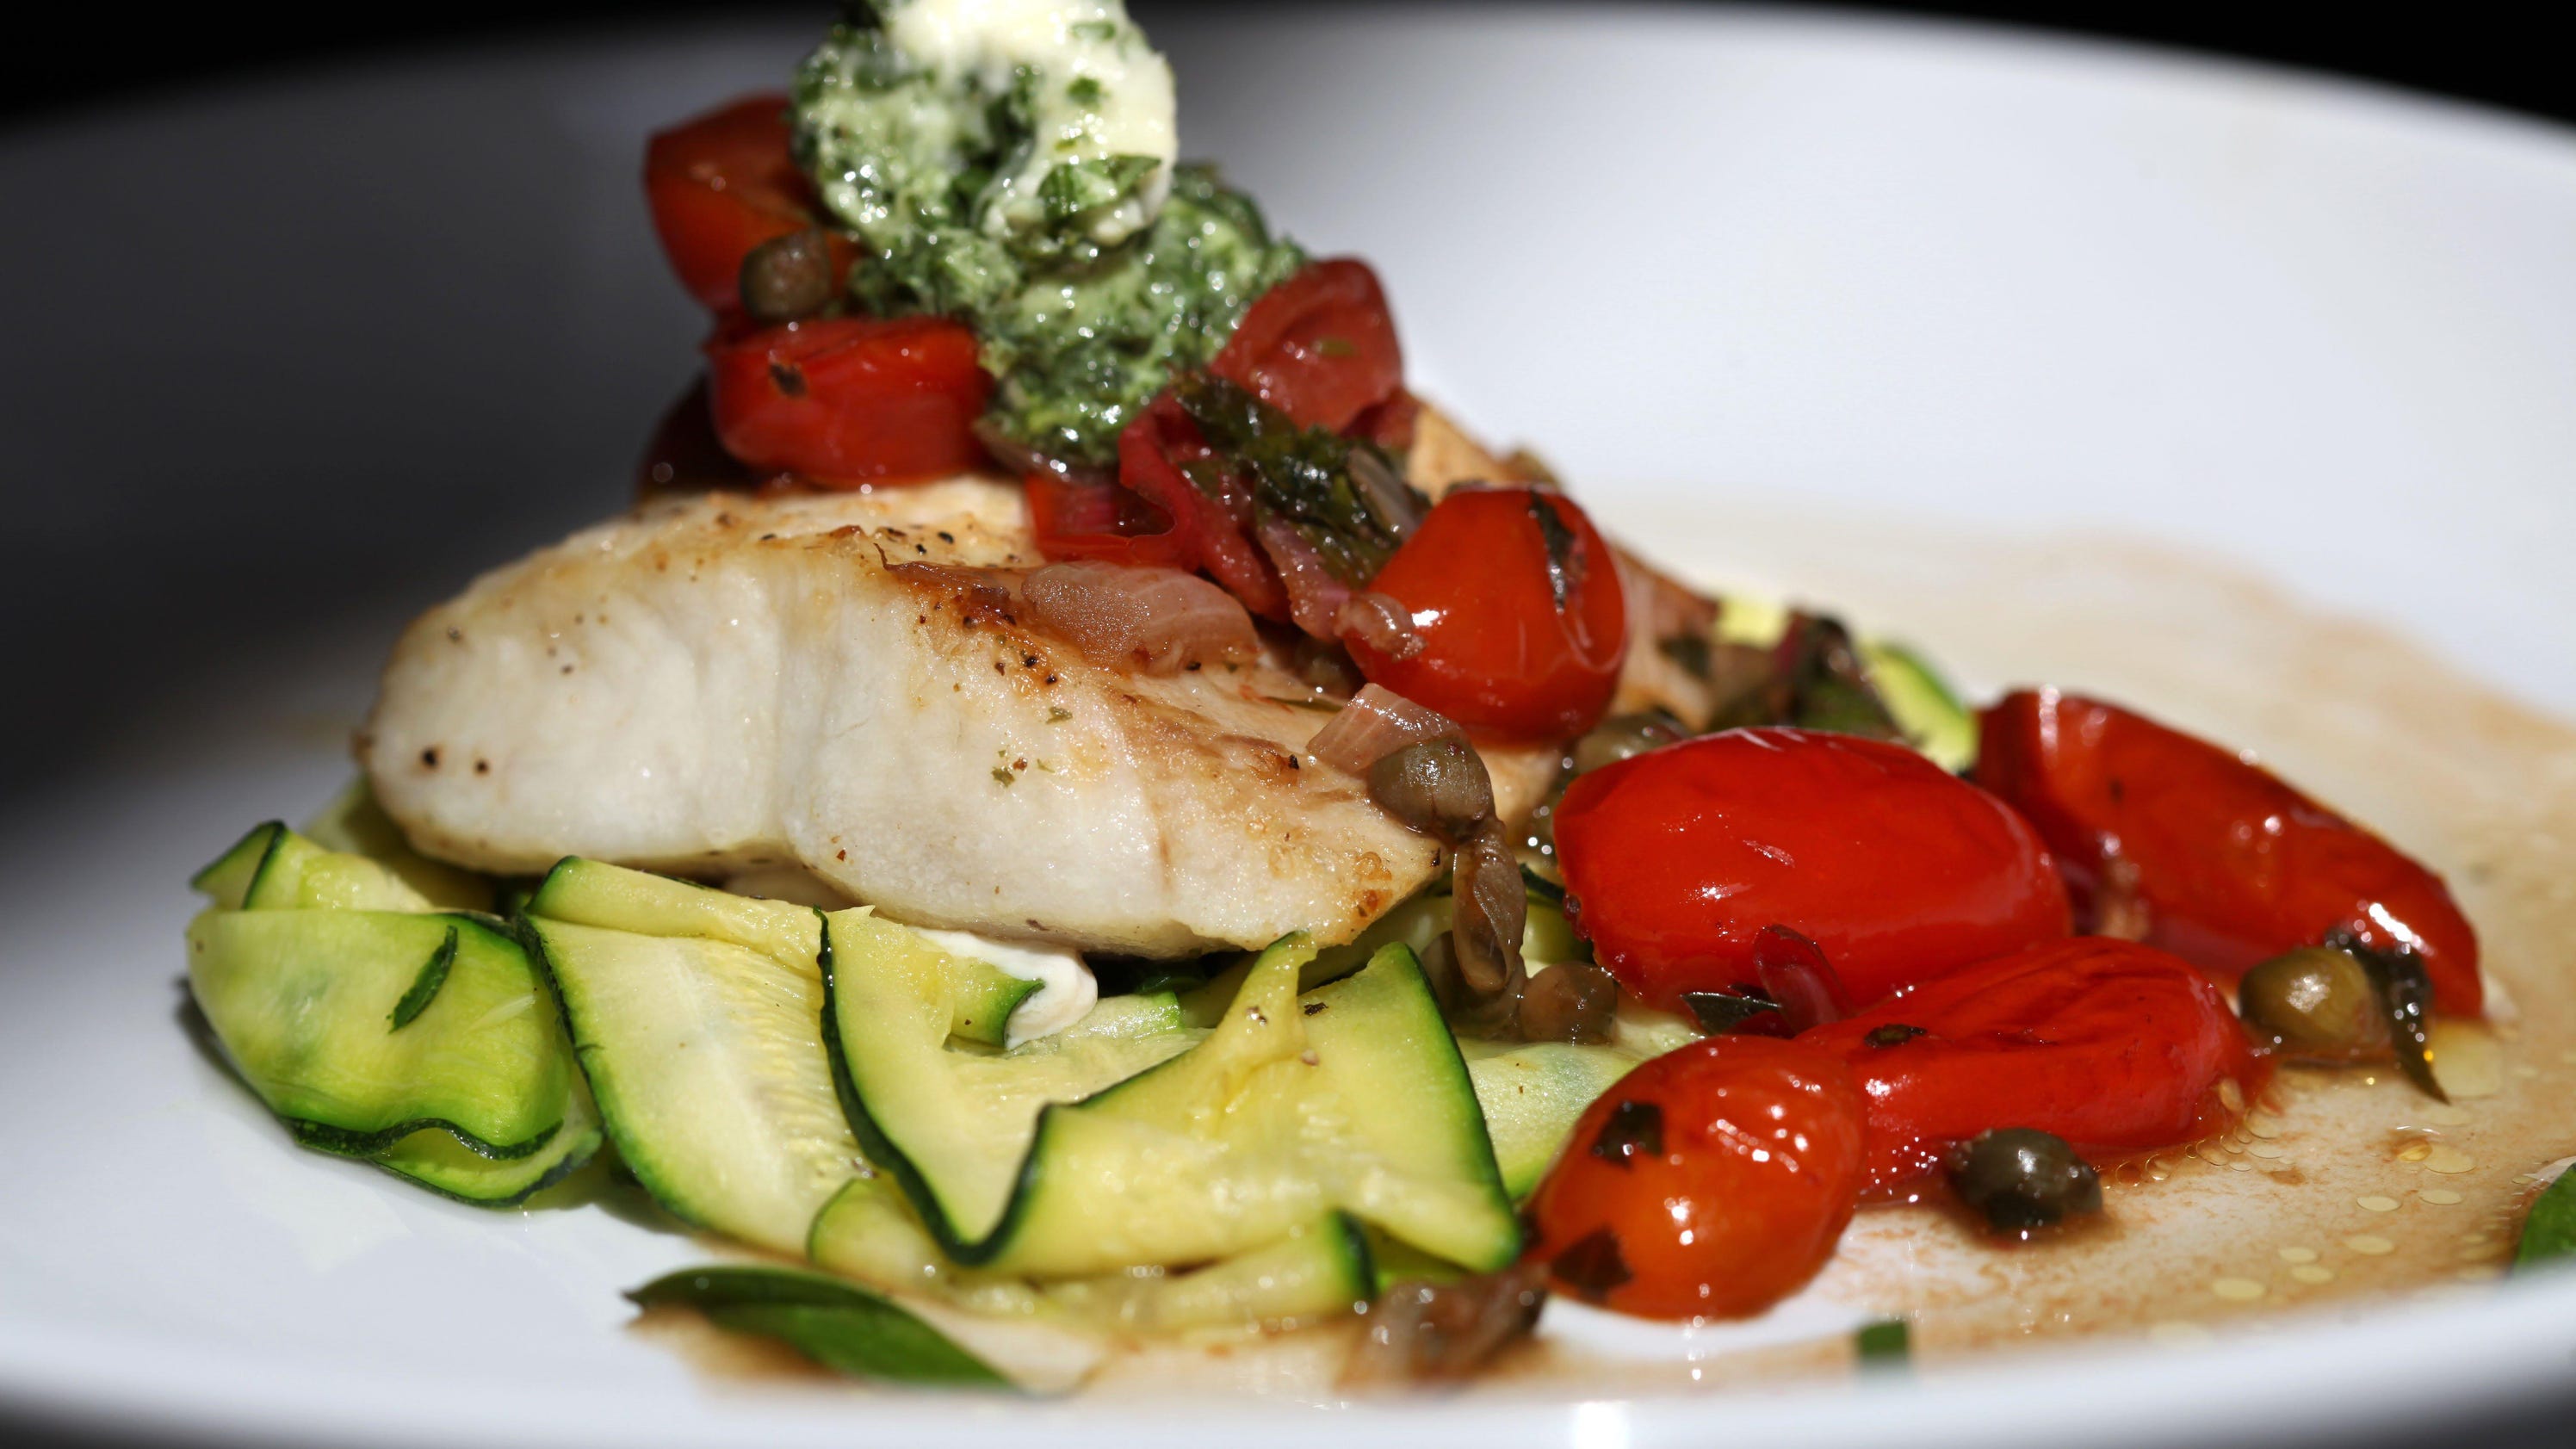 In Good Taste: Dive into a more healthful diet with fish